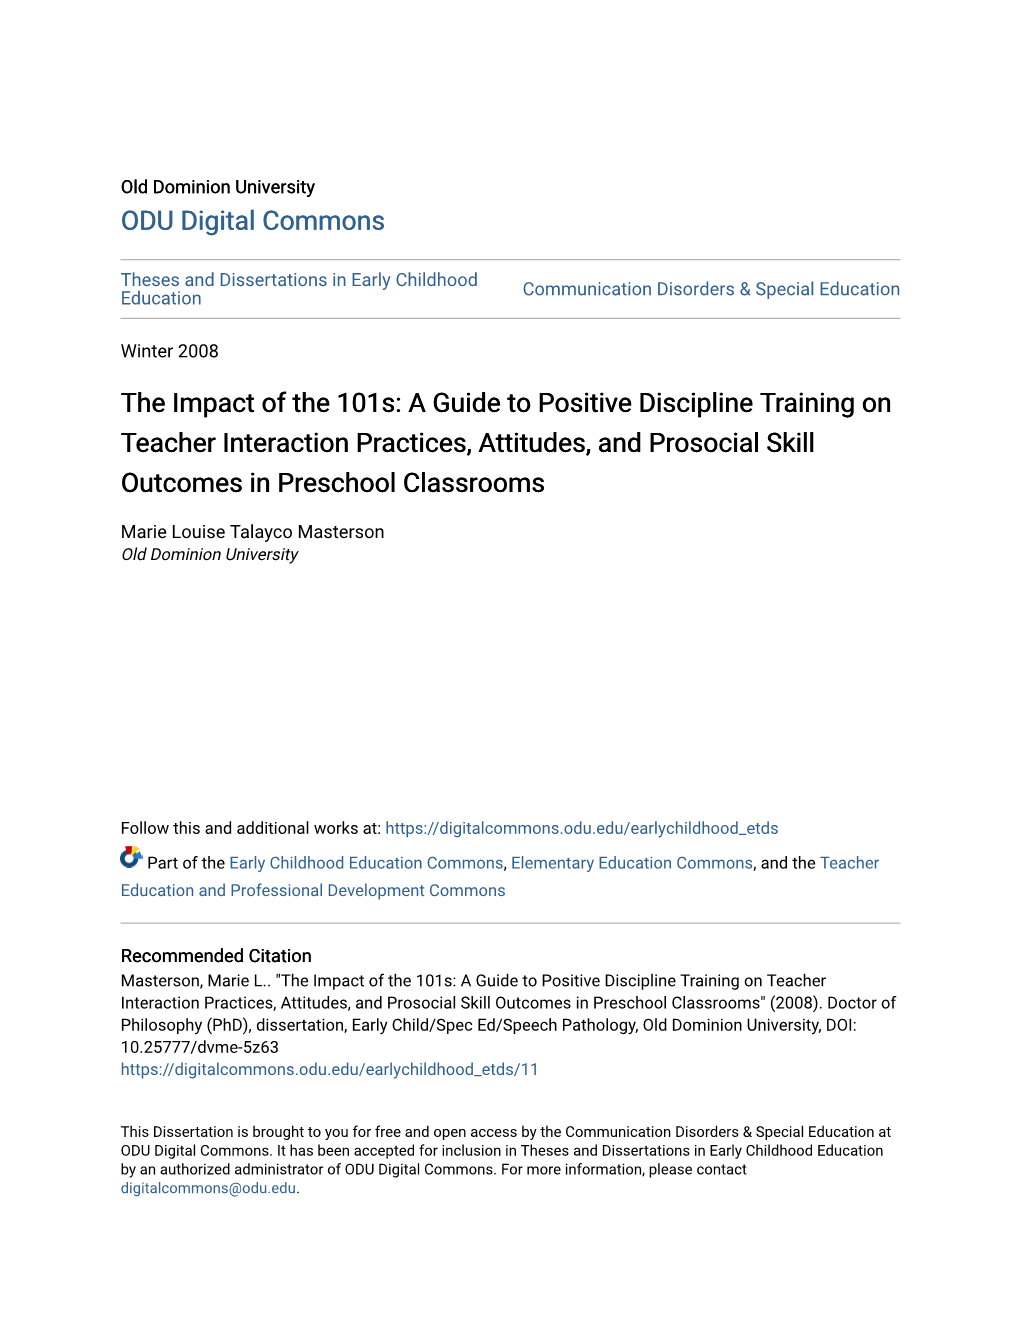 The Impact of the 101S: a Guide to Positive Discipline Training on Teacher Interaction Practices, Attitudes, and Prosocial Skill Outcomes in Preschool Classrooms